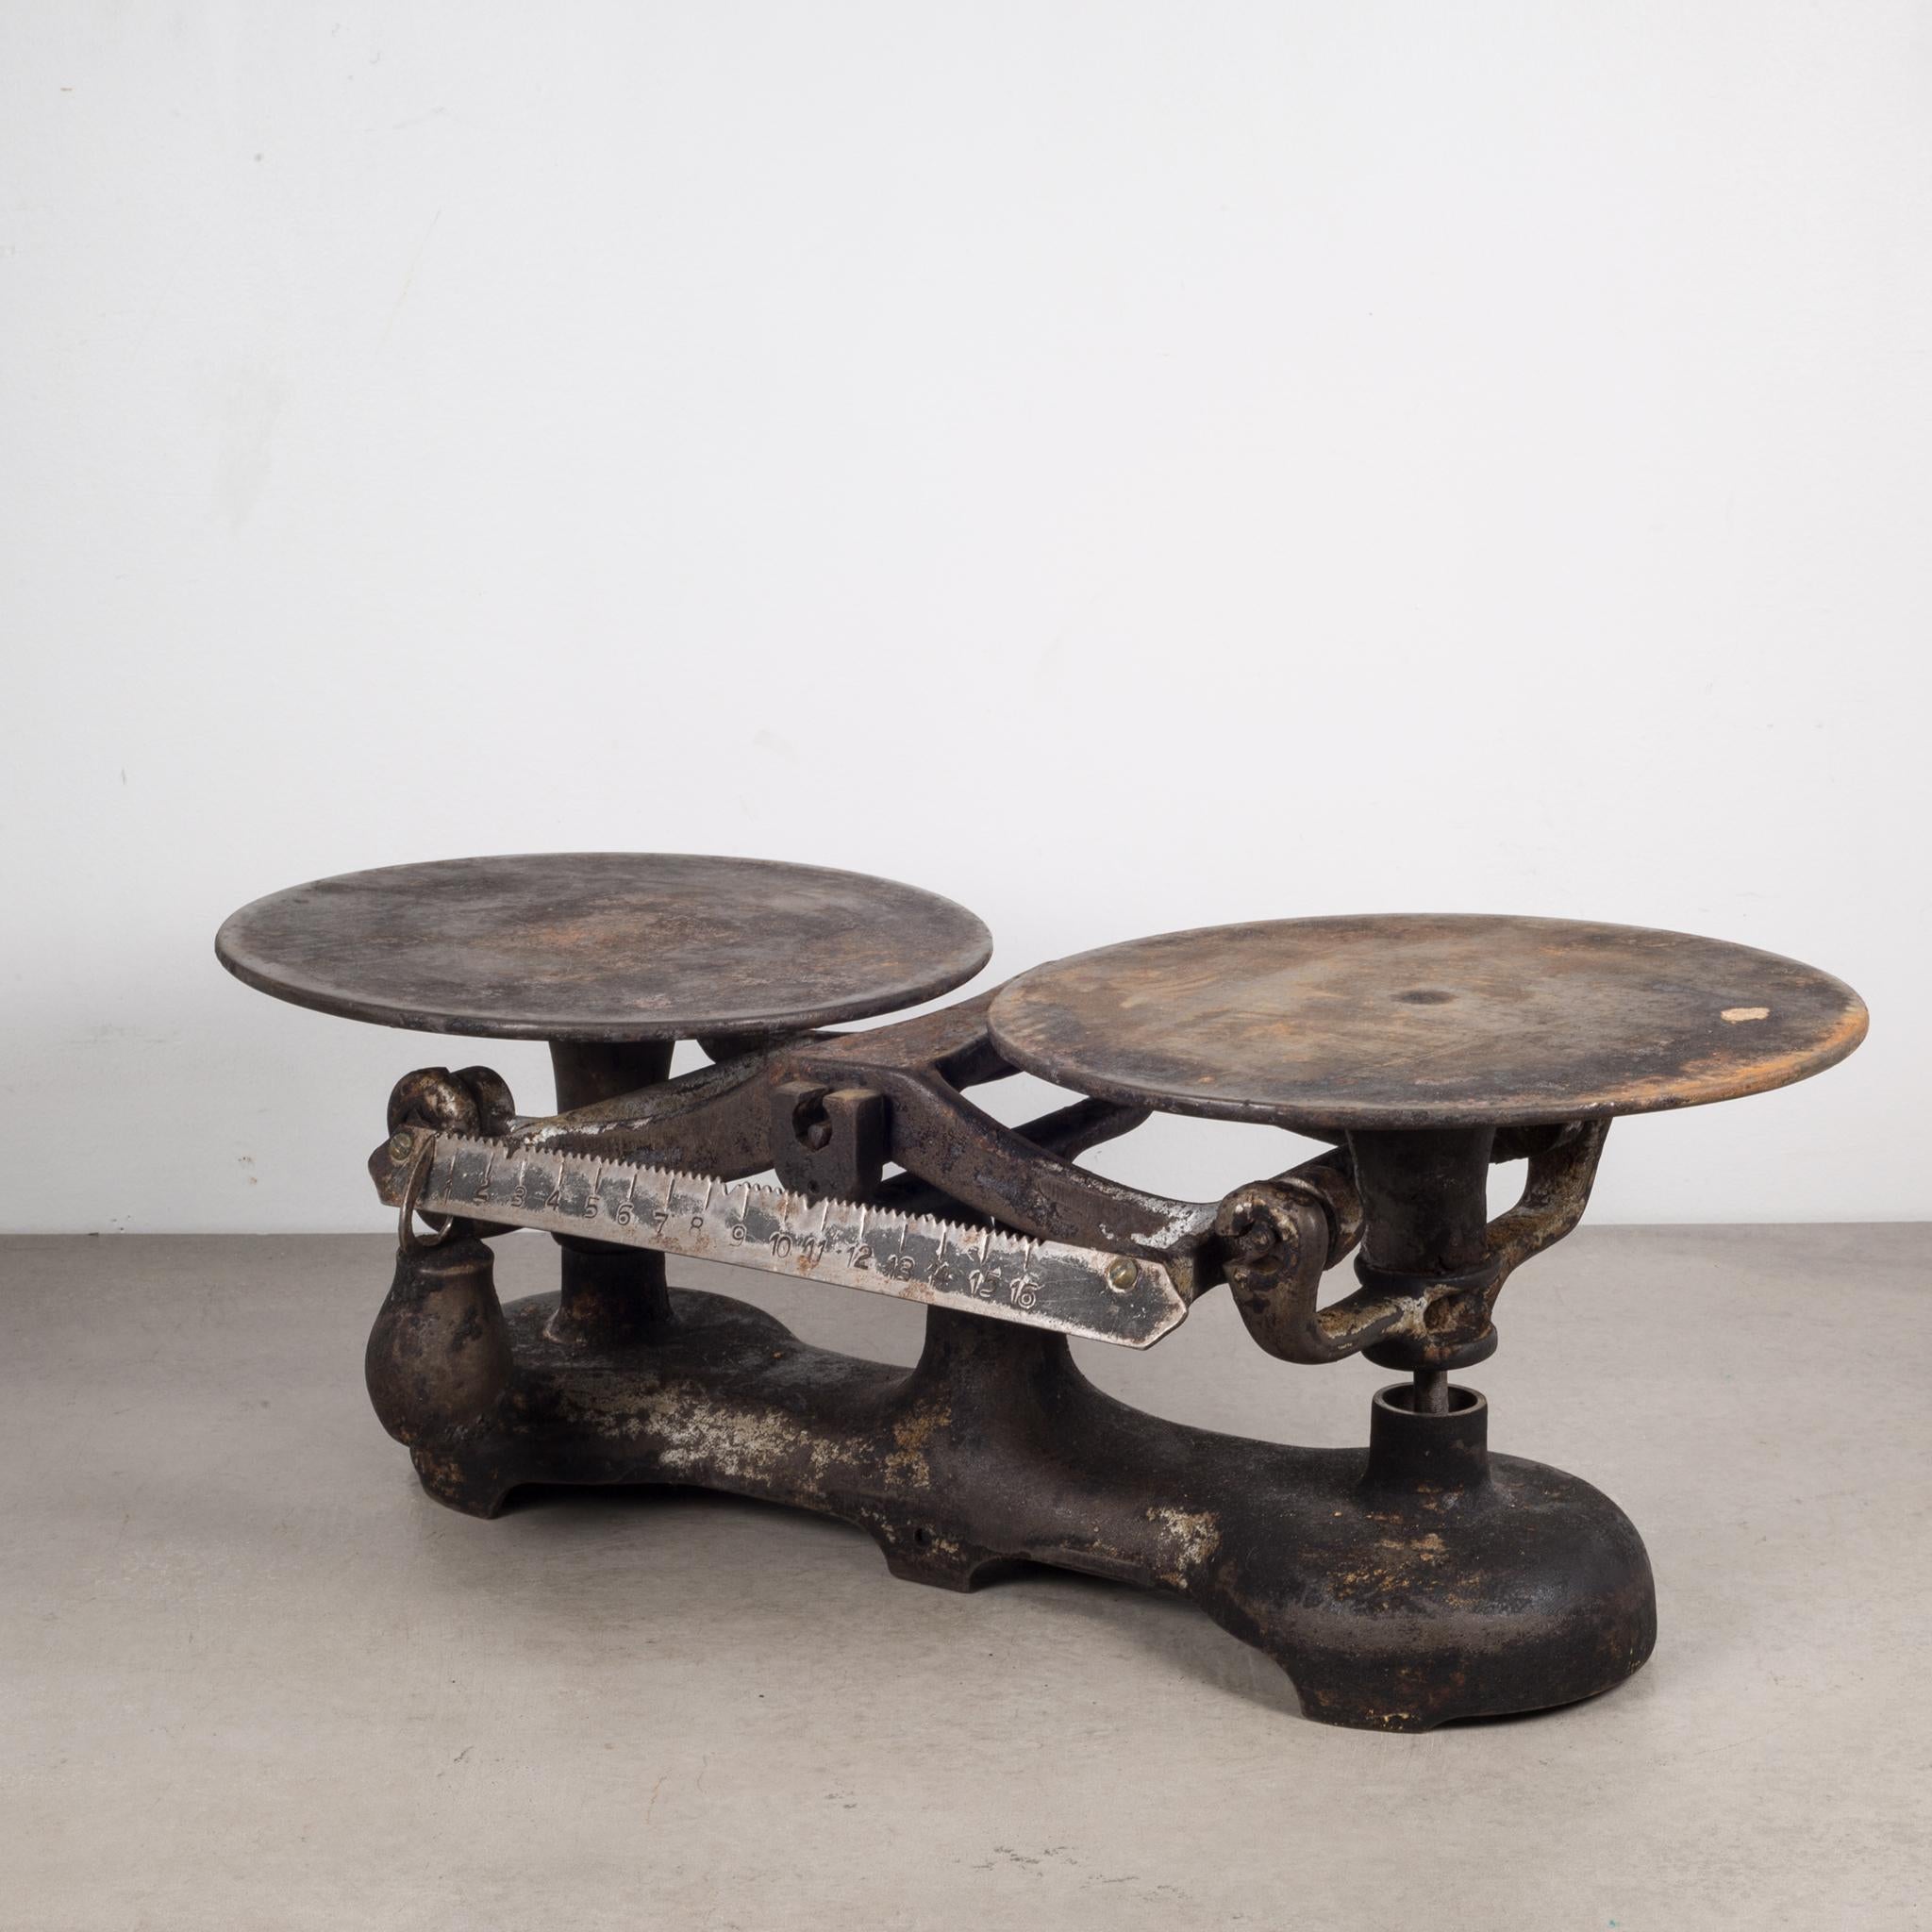 About

A cast iron balance scale with two original weights, side gauge and attached weight. The piece is solidly built and works properly.

Creator: Unknown.
Date of manufacture: circa 1800s.
Materials and techniques: Cast iron.
Condition: